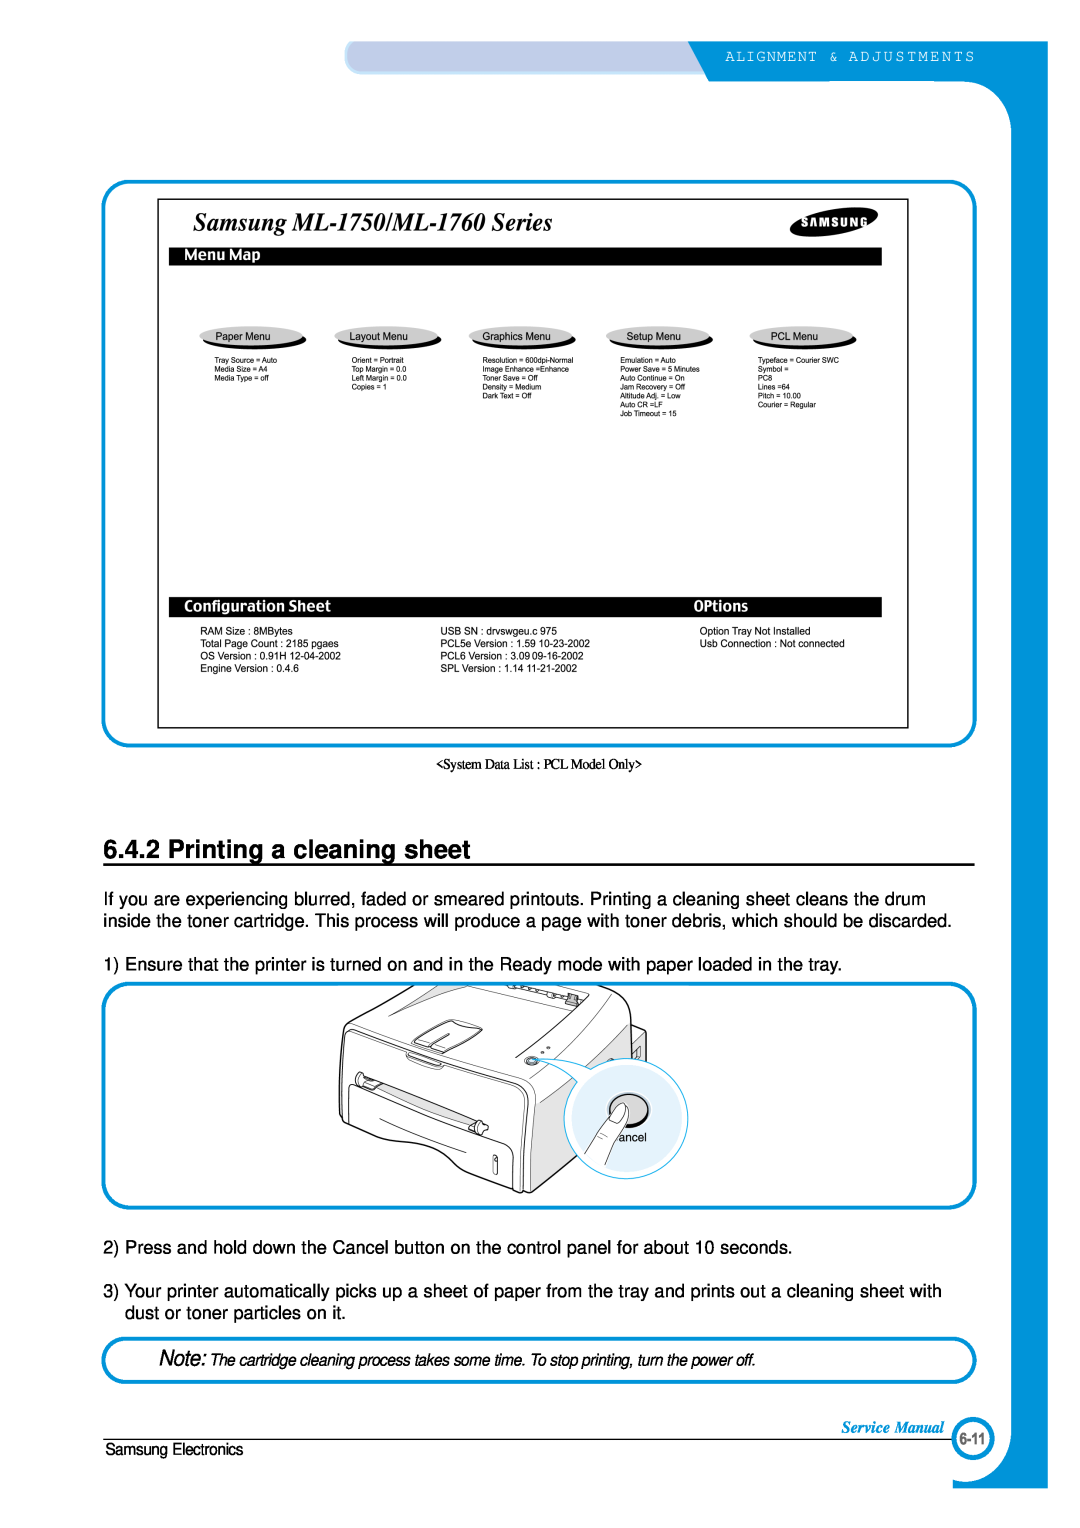 Samsung ML-1700 specifications Printing a cleaning sheet, System Data List PCL Model Only 